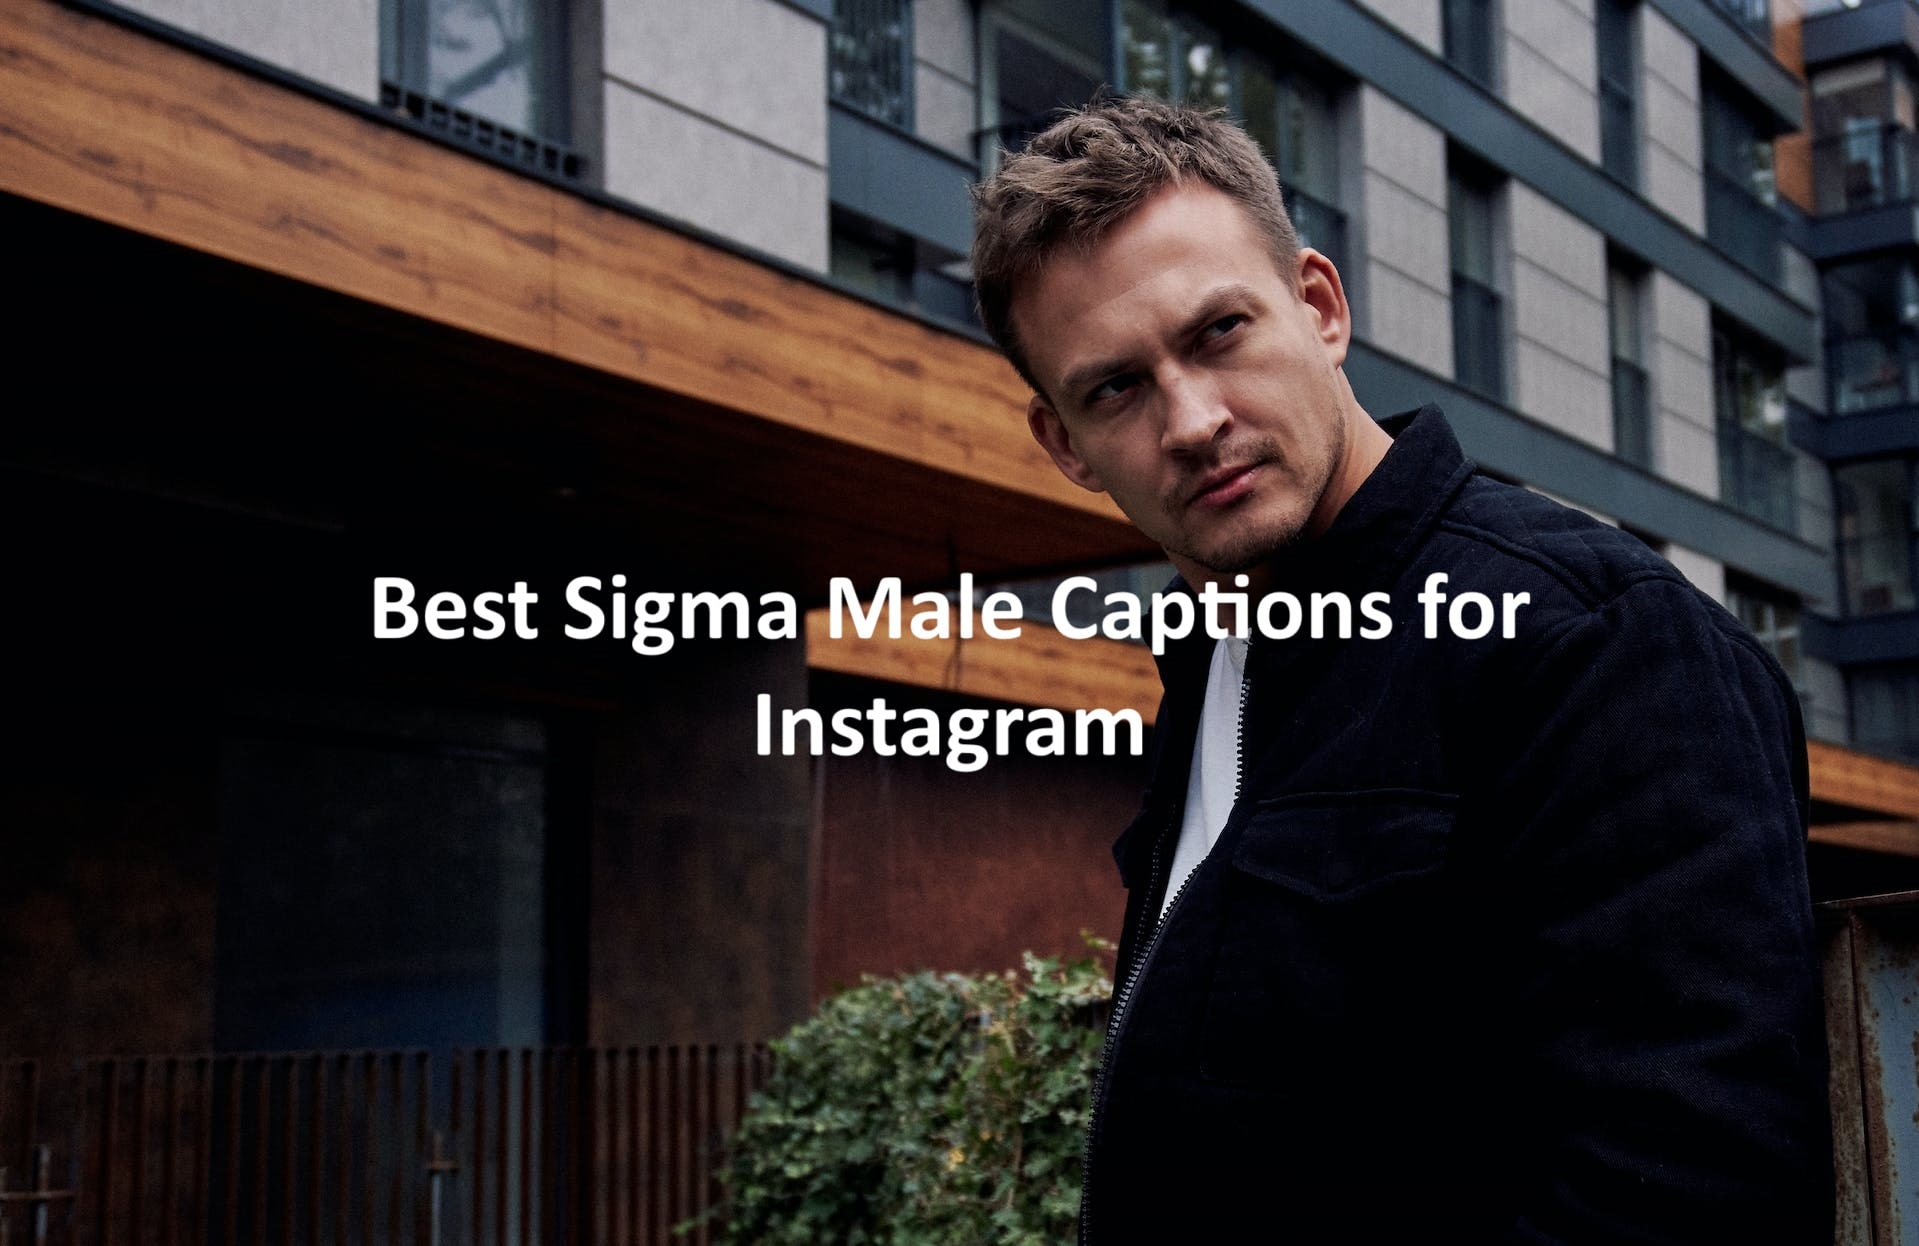 Sigma Male Captions for Instagram